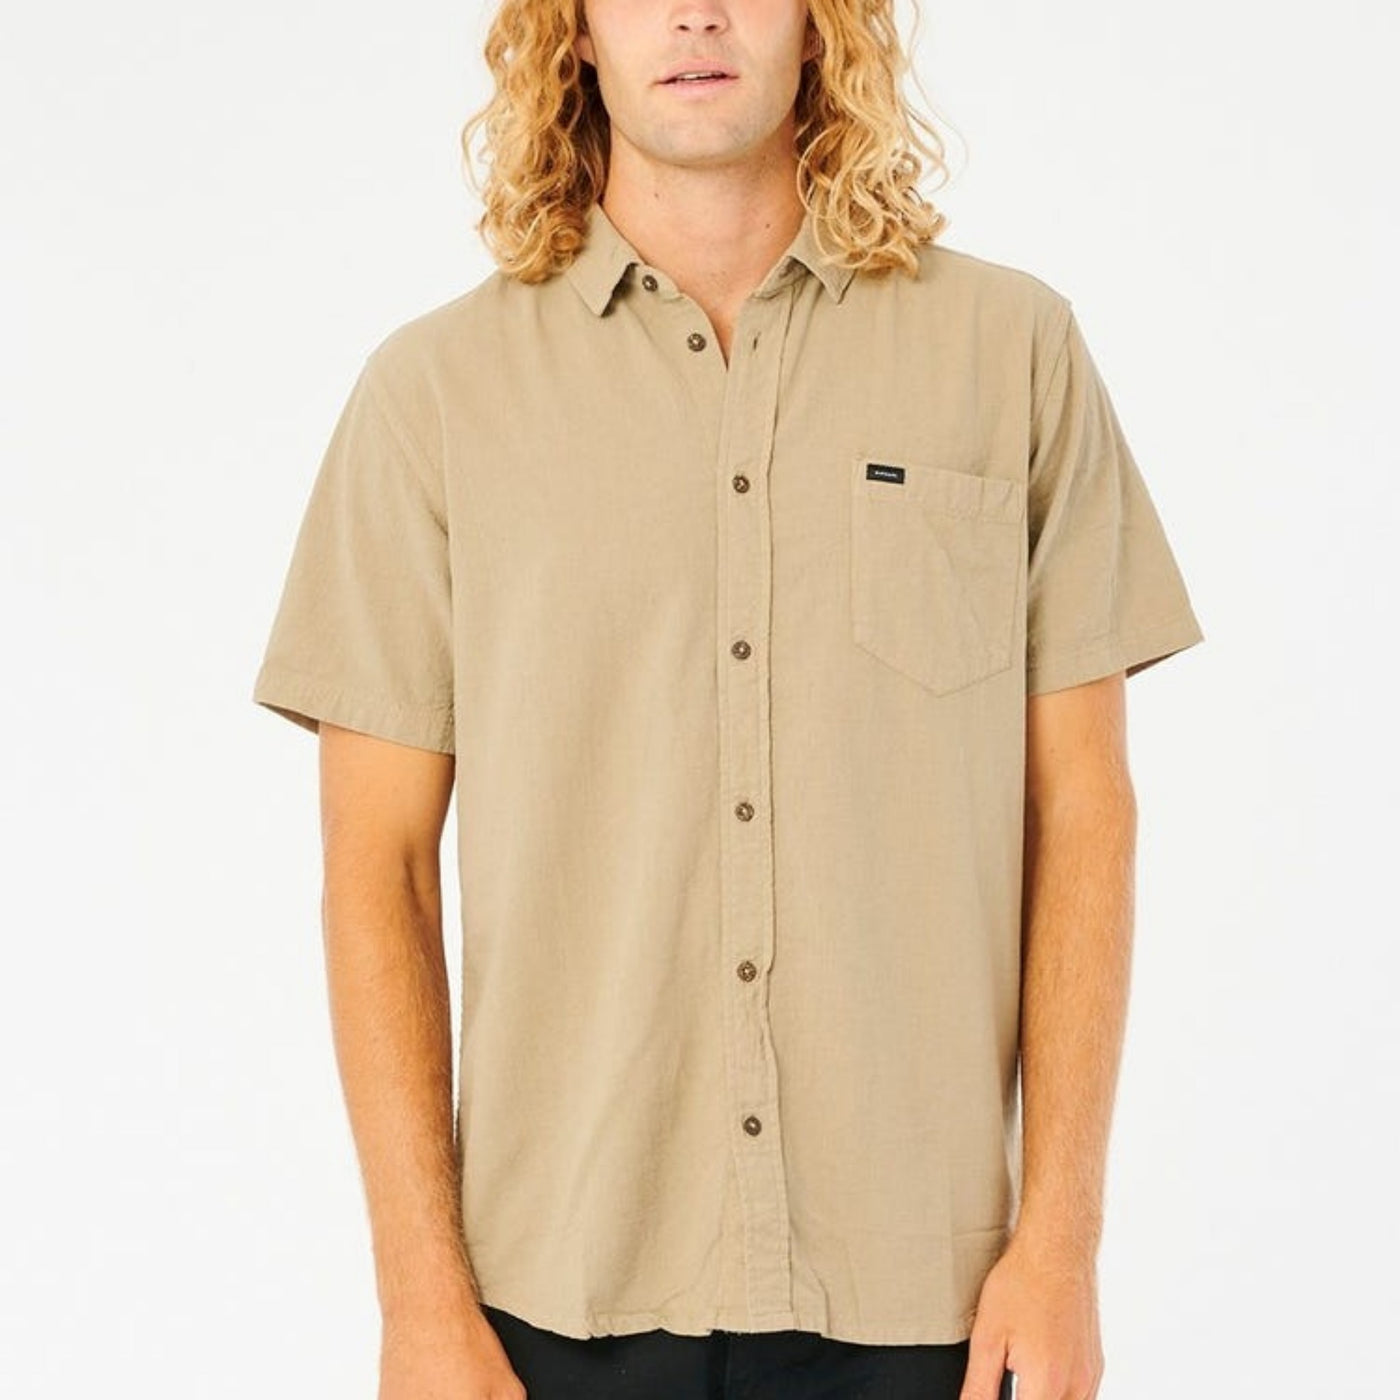 Rip Curl Washed Short Sleeve Shirt - Washed Taupe